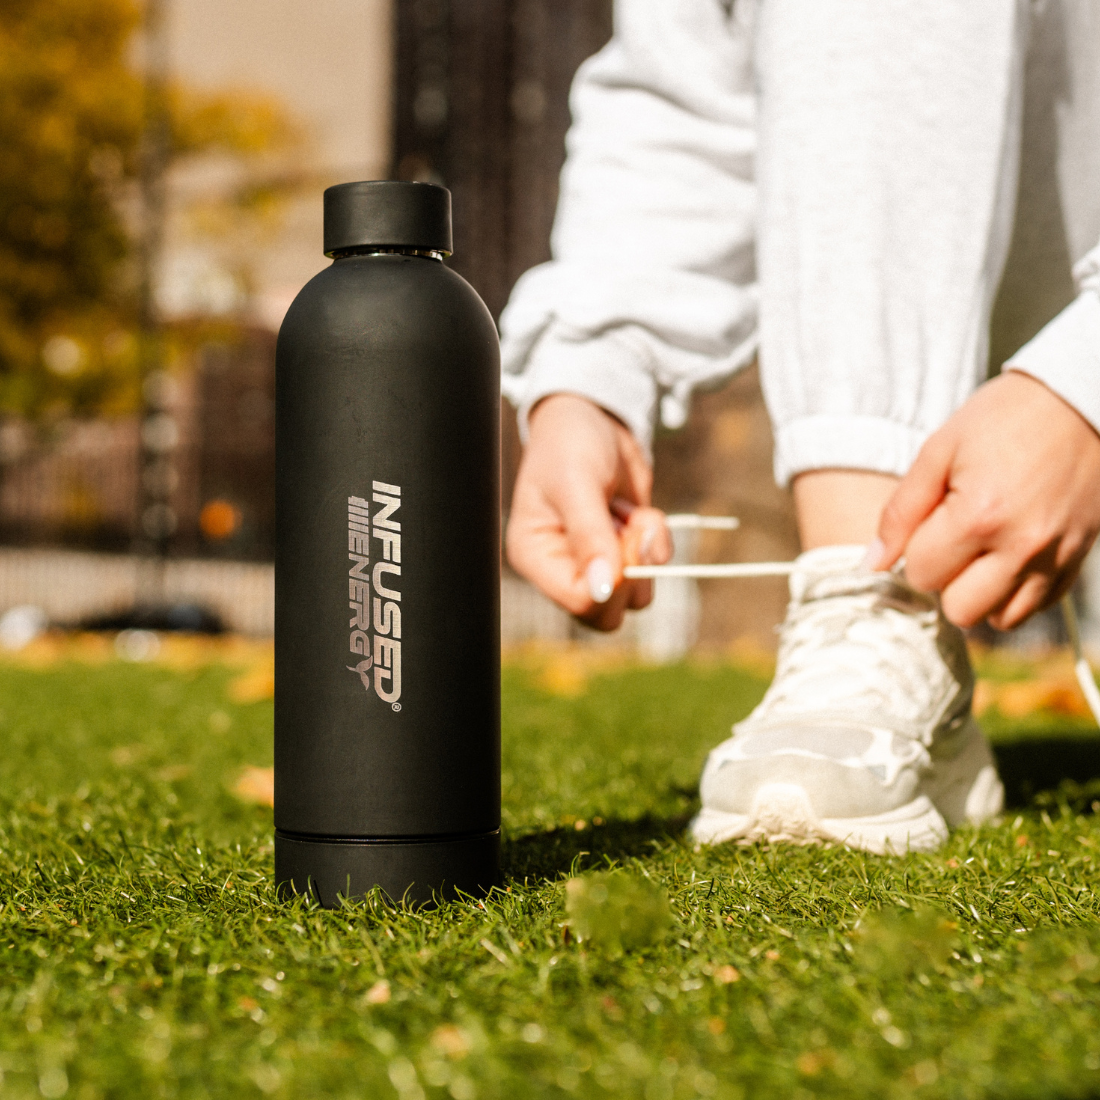 Thermo Infuser Bottle